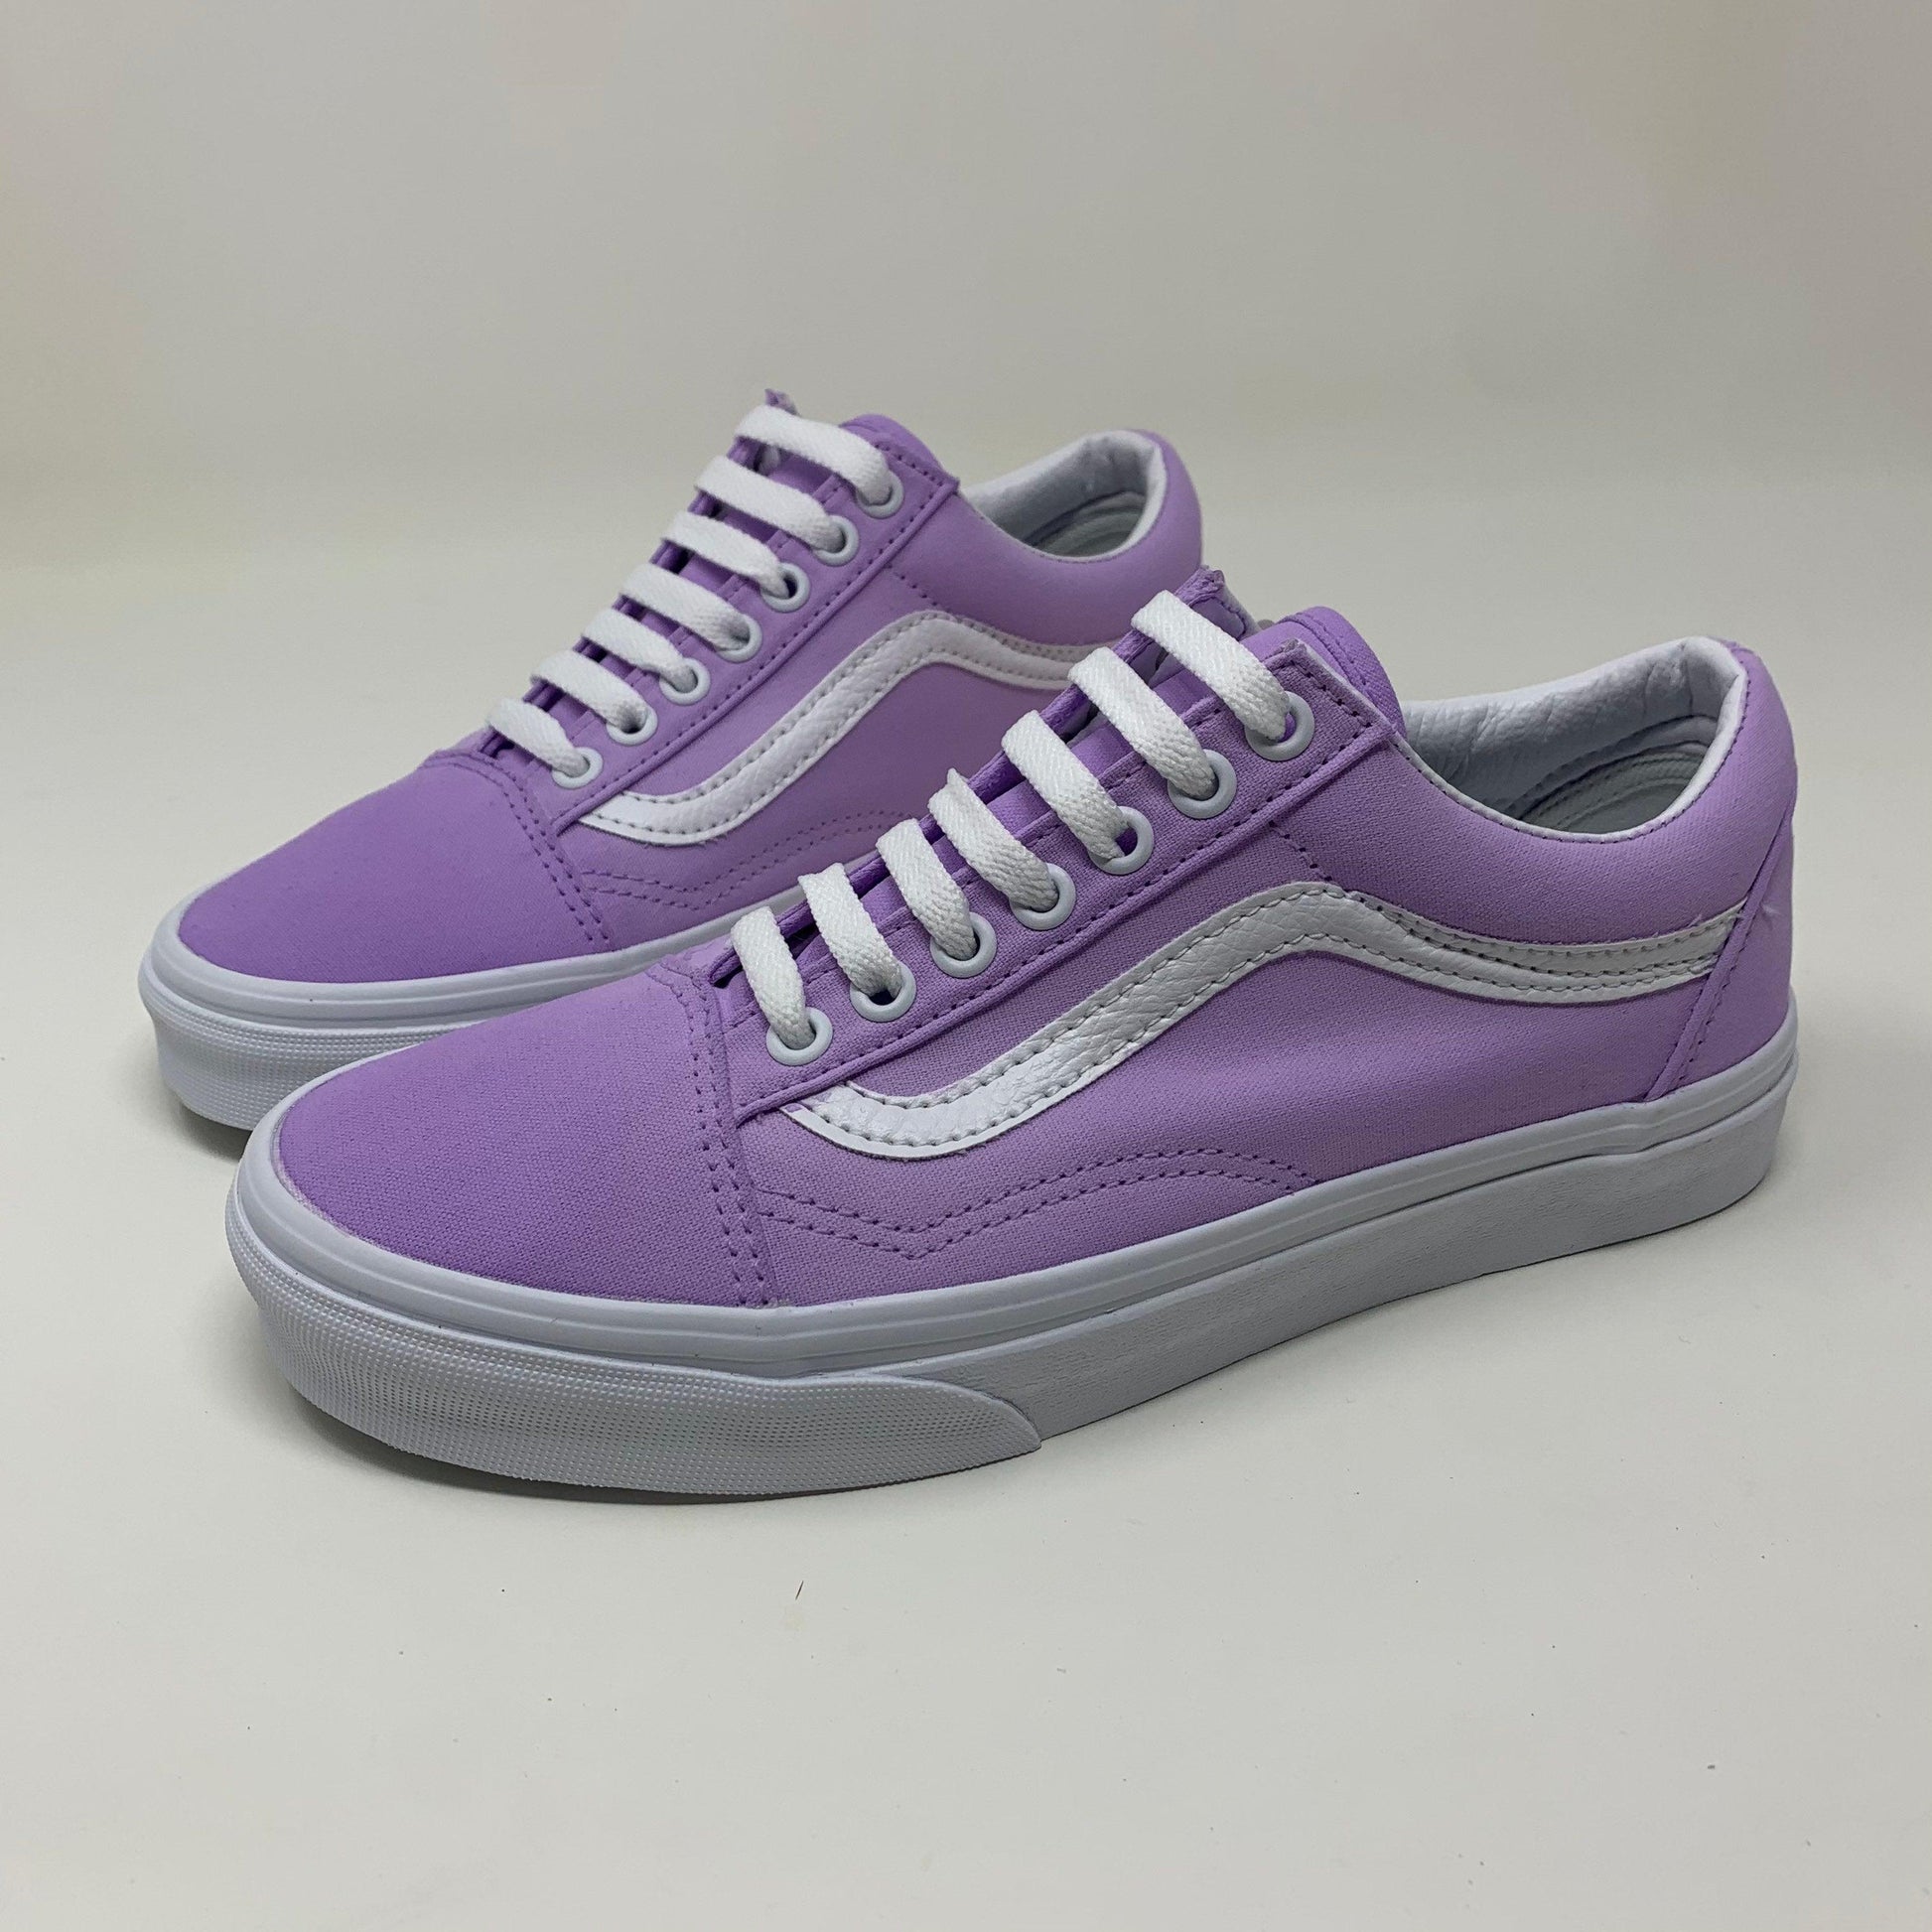 Lavender Shoes - ButterMakesMeHappy